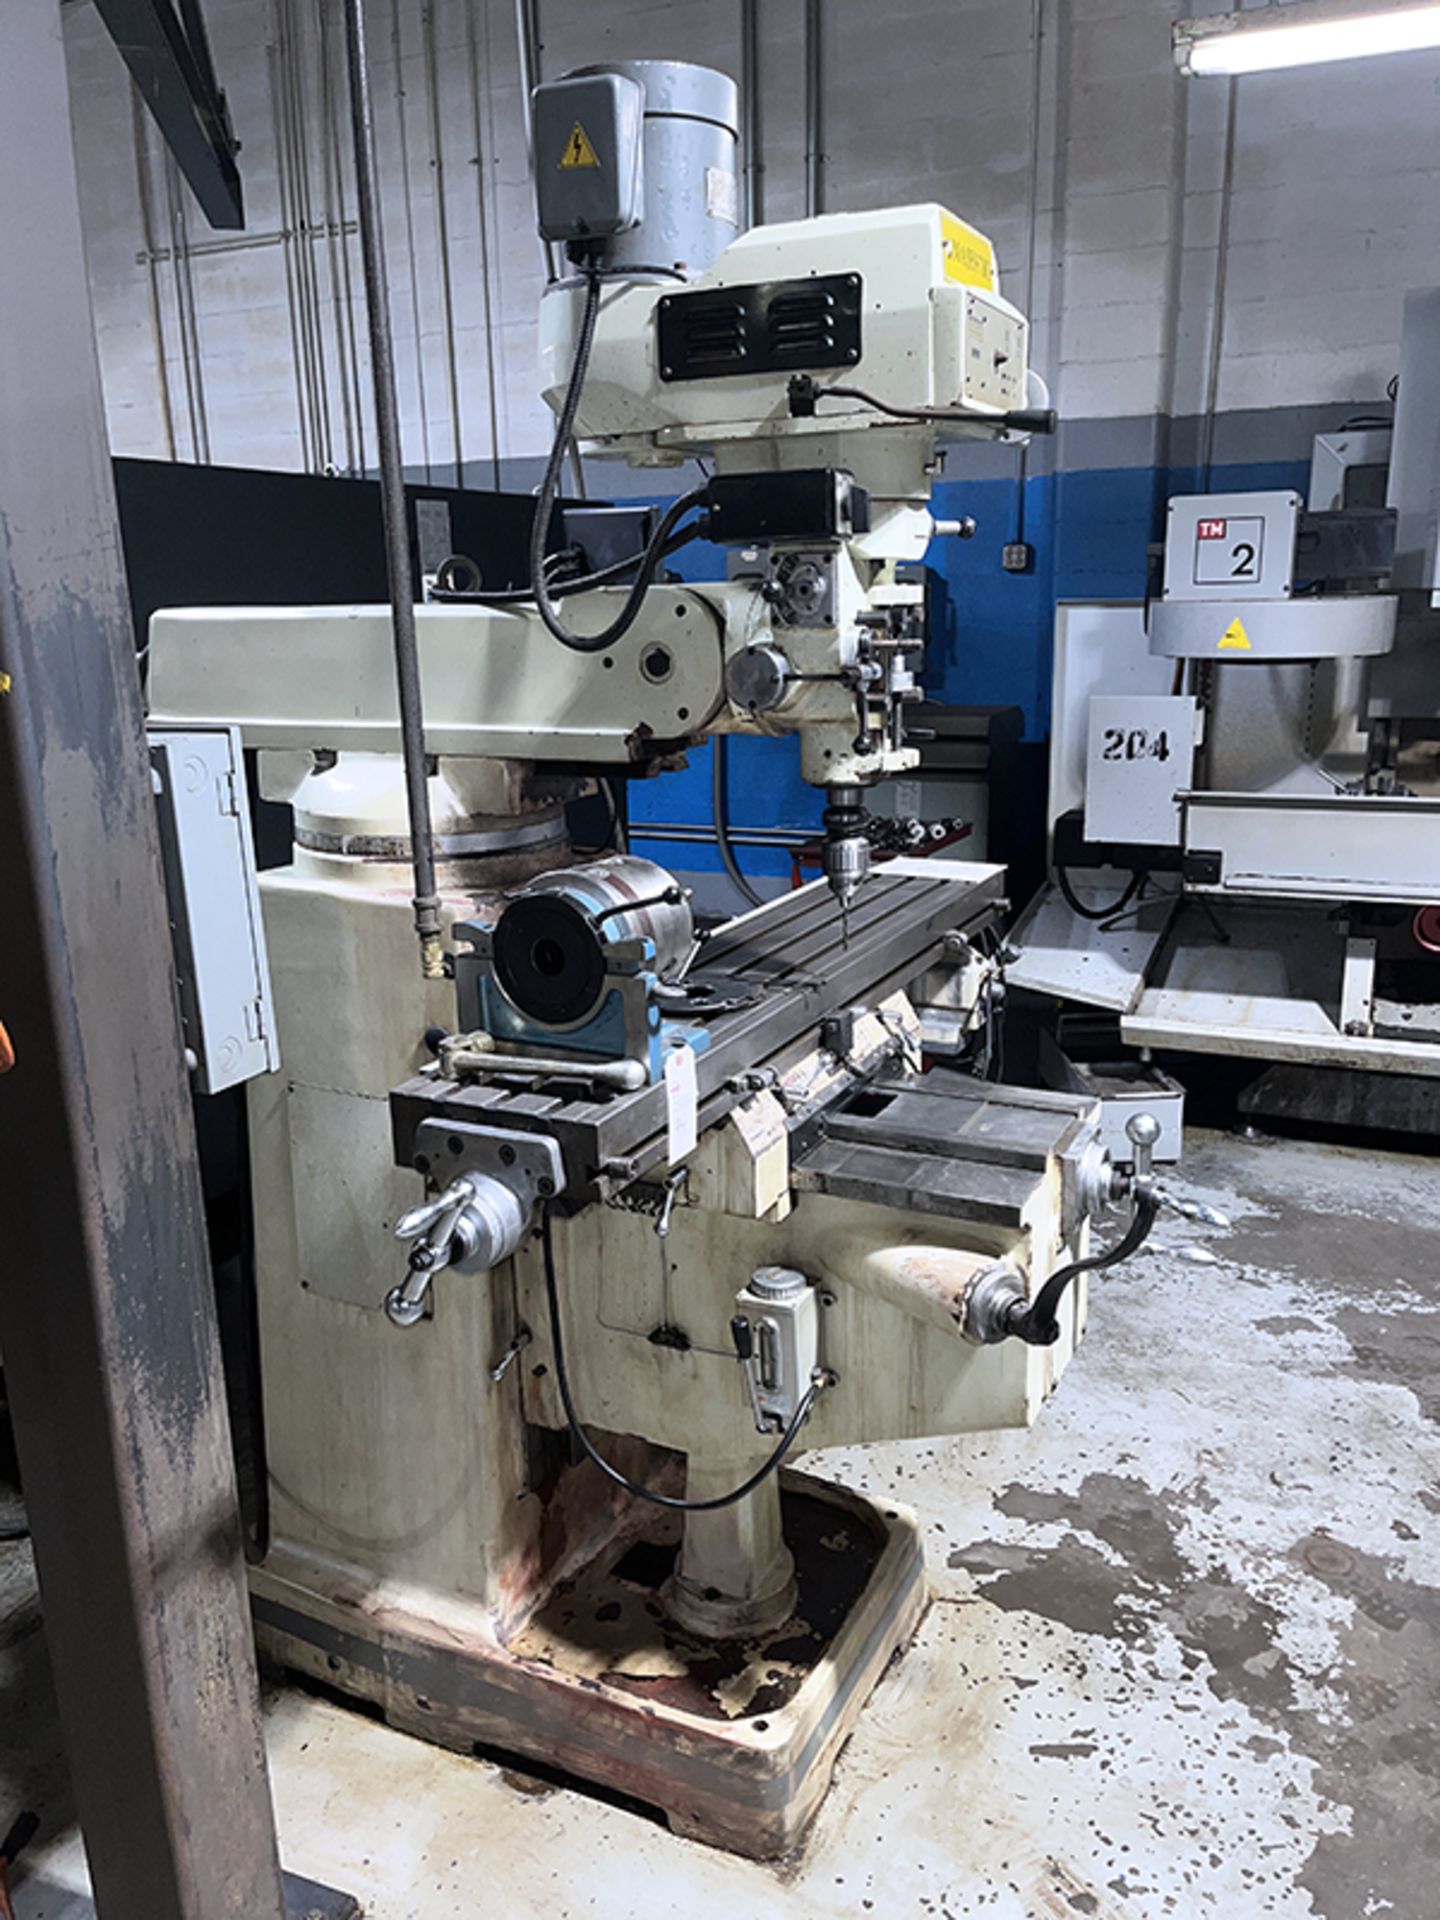 Majestic RM1054 V3 Vertical Milling Machine (2008) - Image 3 of 13